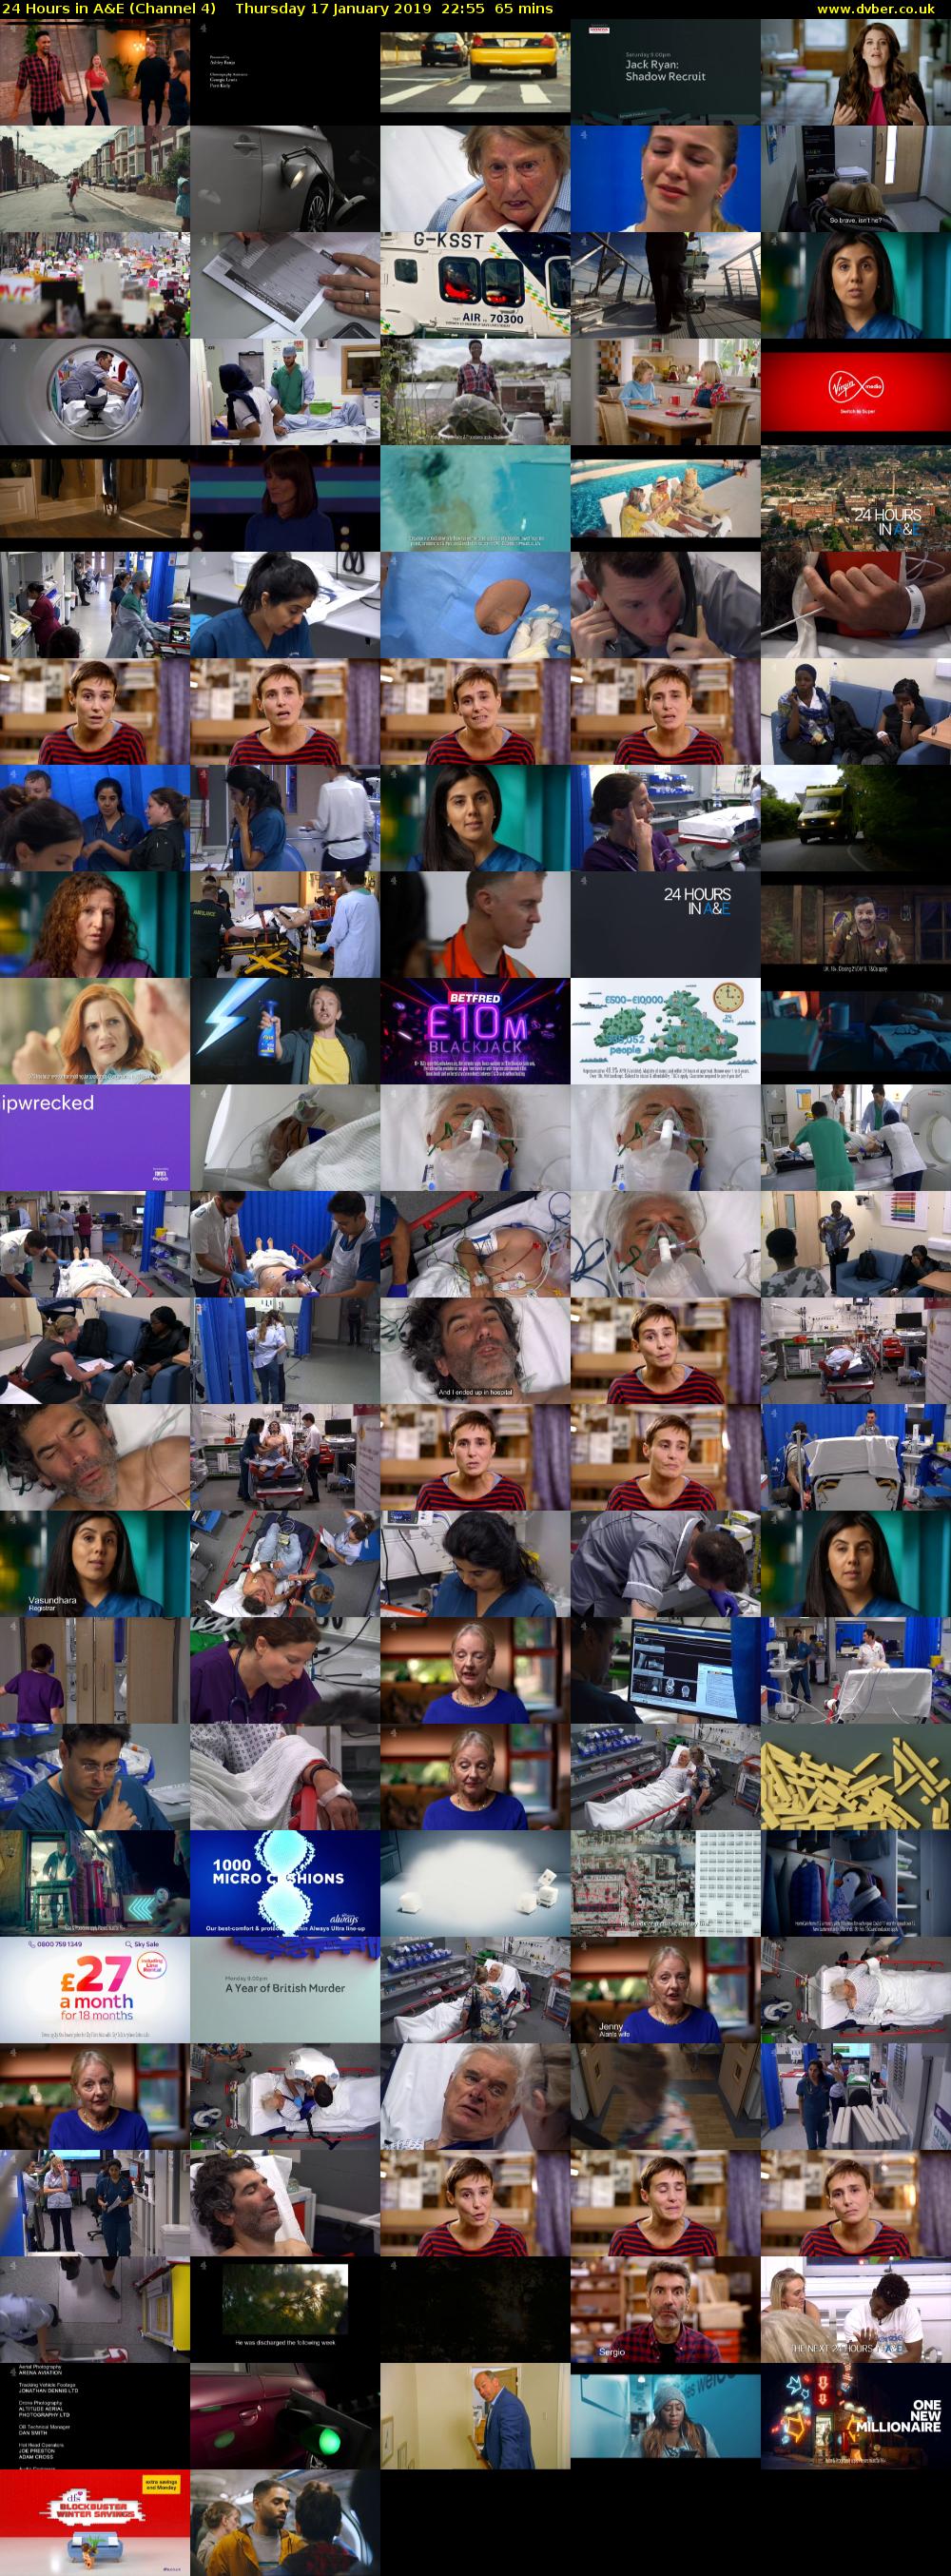 24 Hours in A&E (Channel 4) Thursday 17 January 2019 22:55 - 00:00